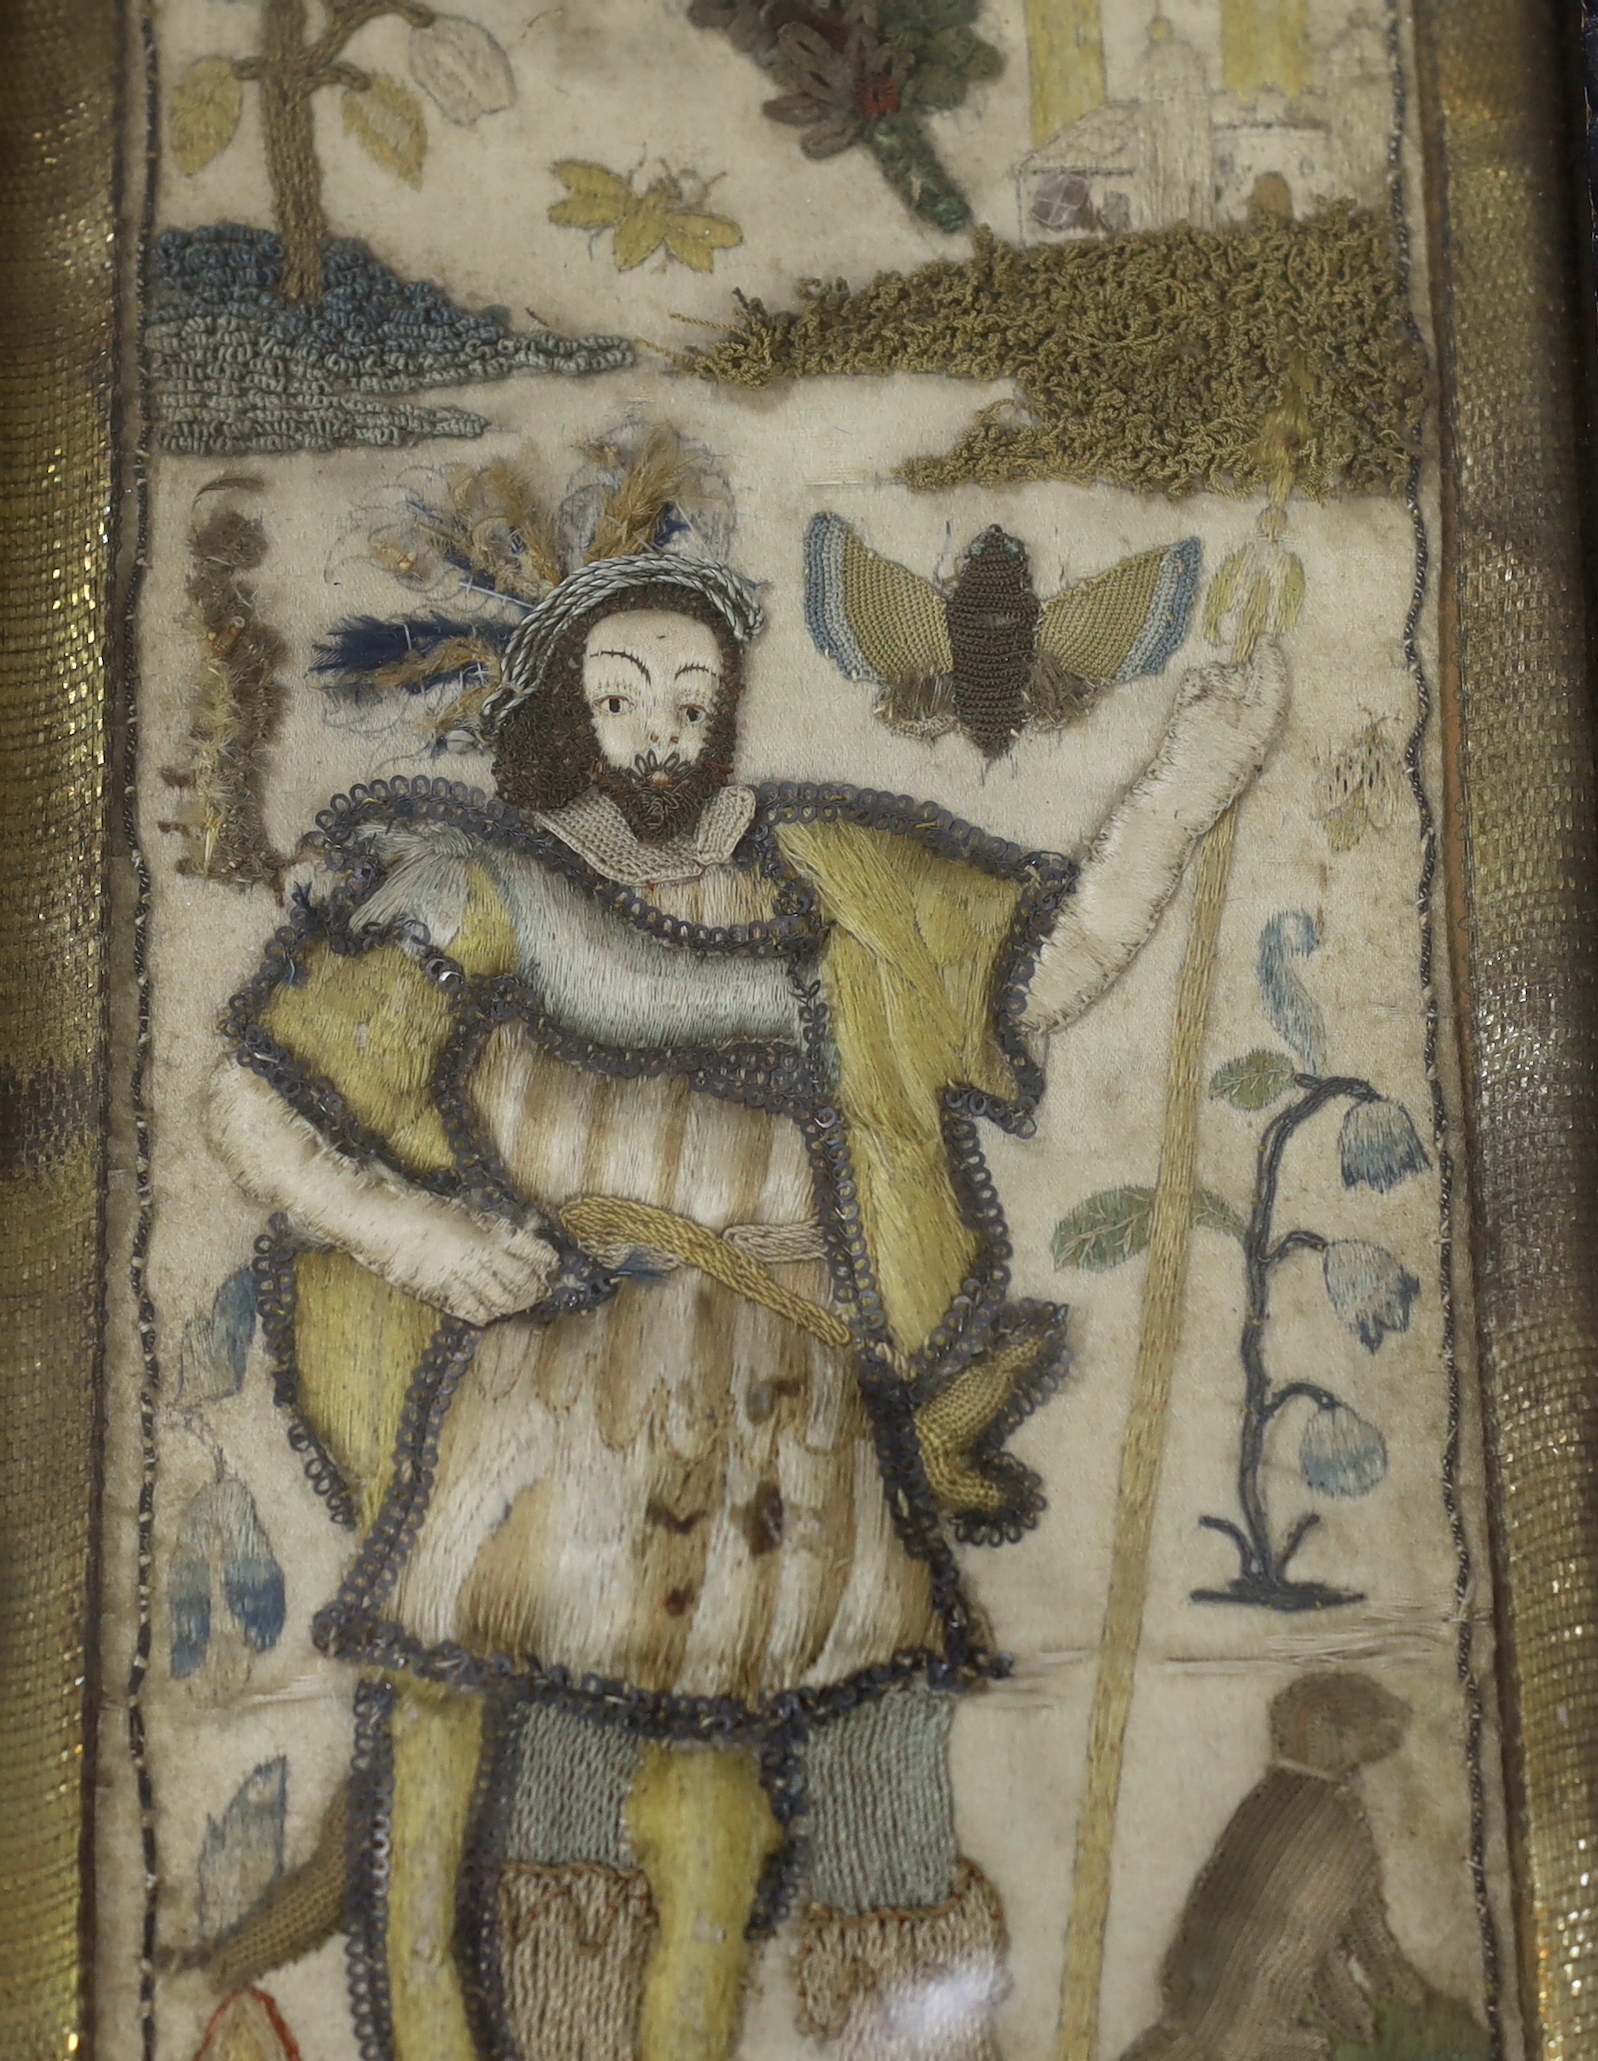 A framed 17th century stumpwork embroidery panel, embroidered with a central figure of a nobleman or king, possibly Henry VIII, holding a staff, wearing a cloth of gold with his dog in the grounds of a castle (possibly N